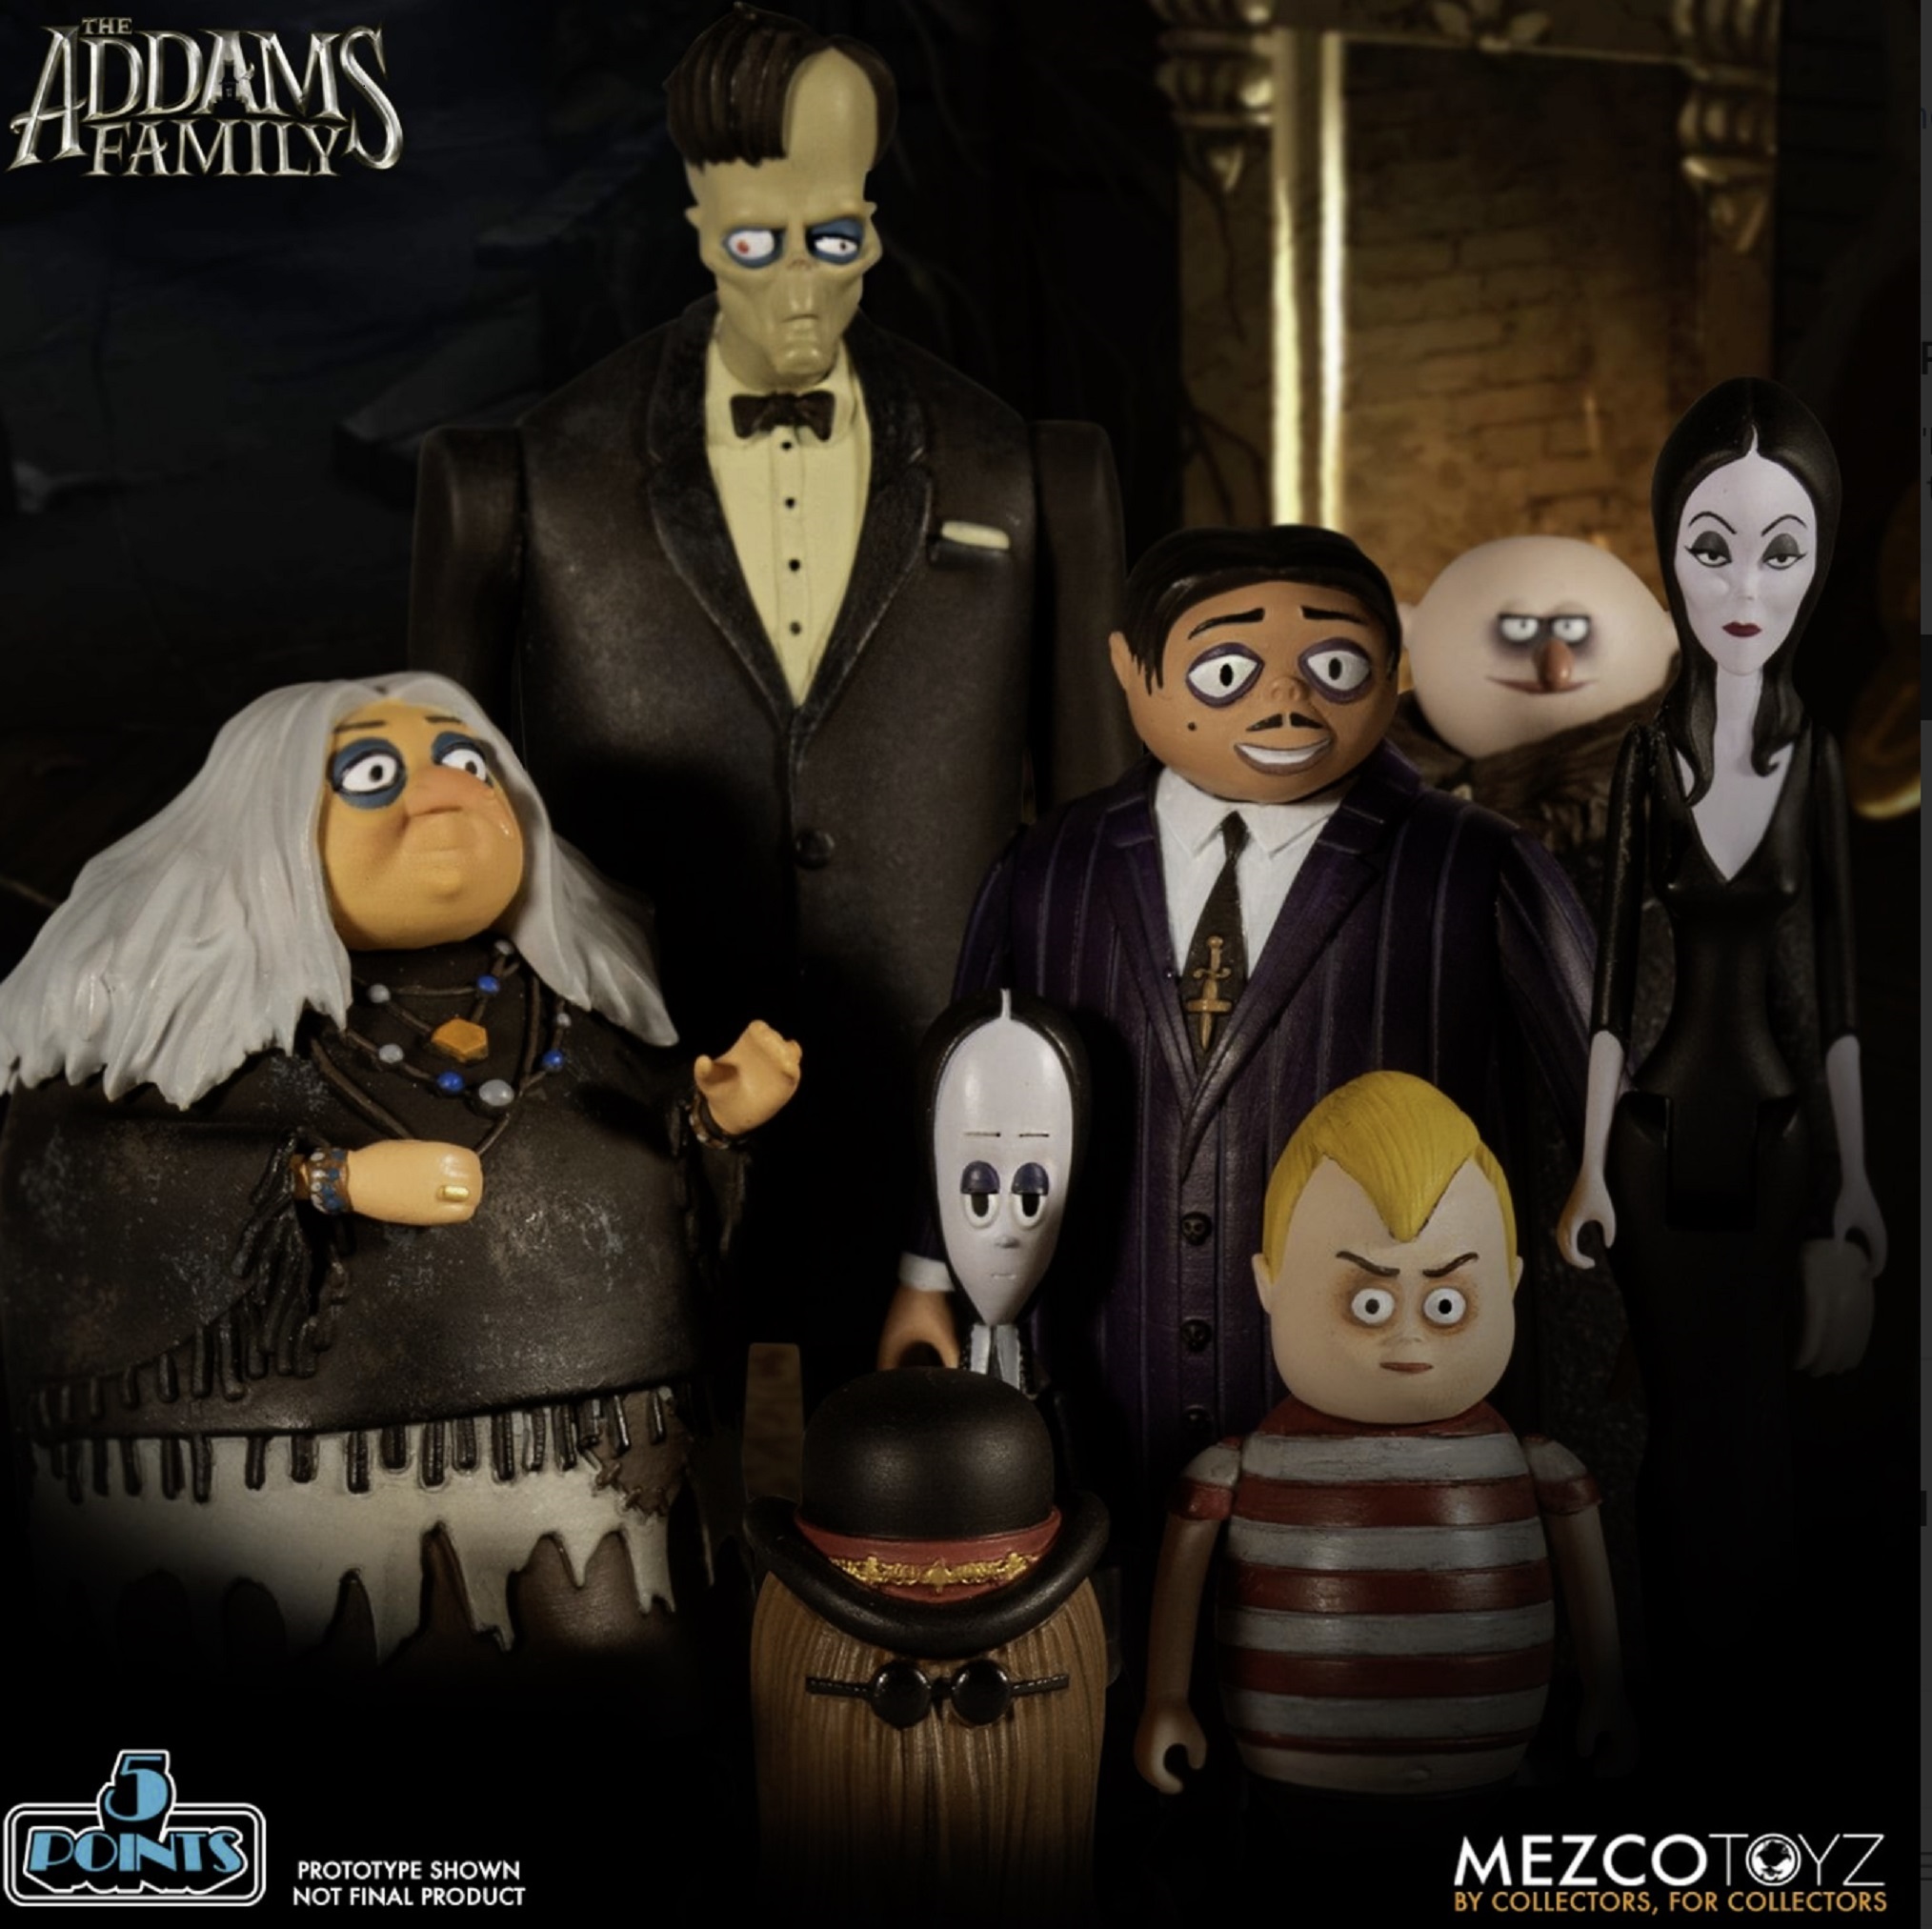 The Addams Family Halloween Gift Guide